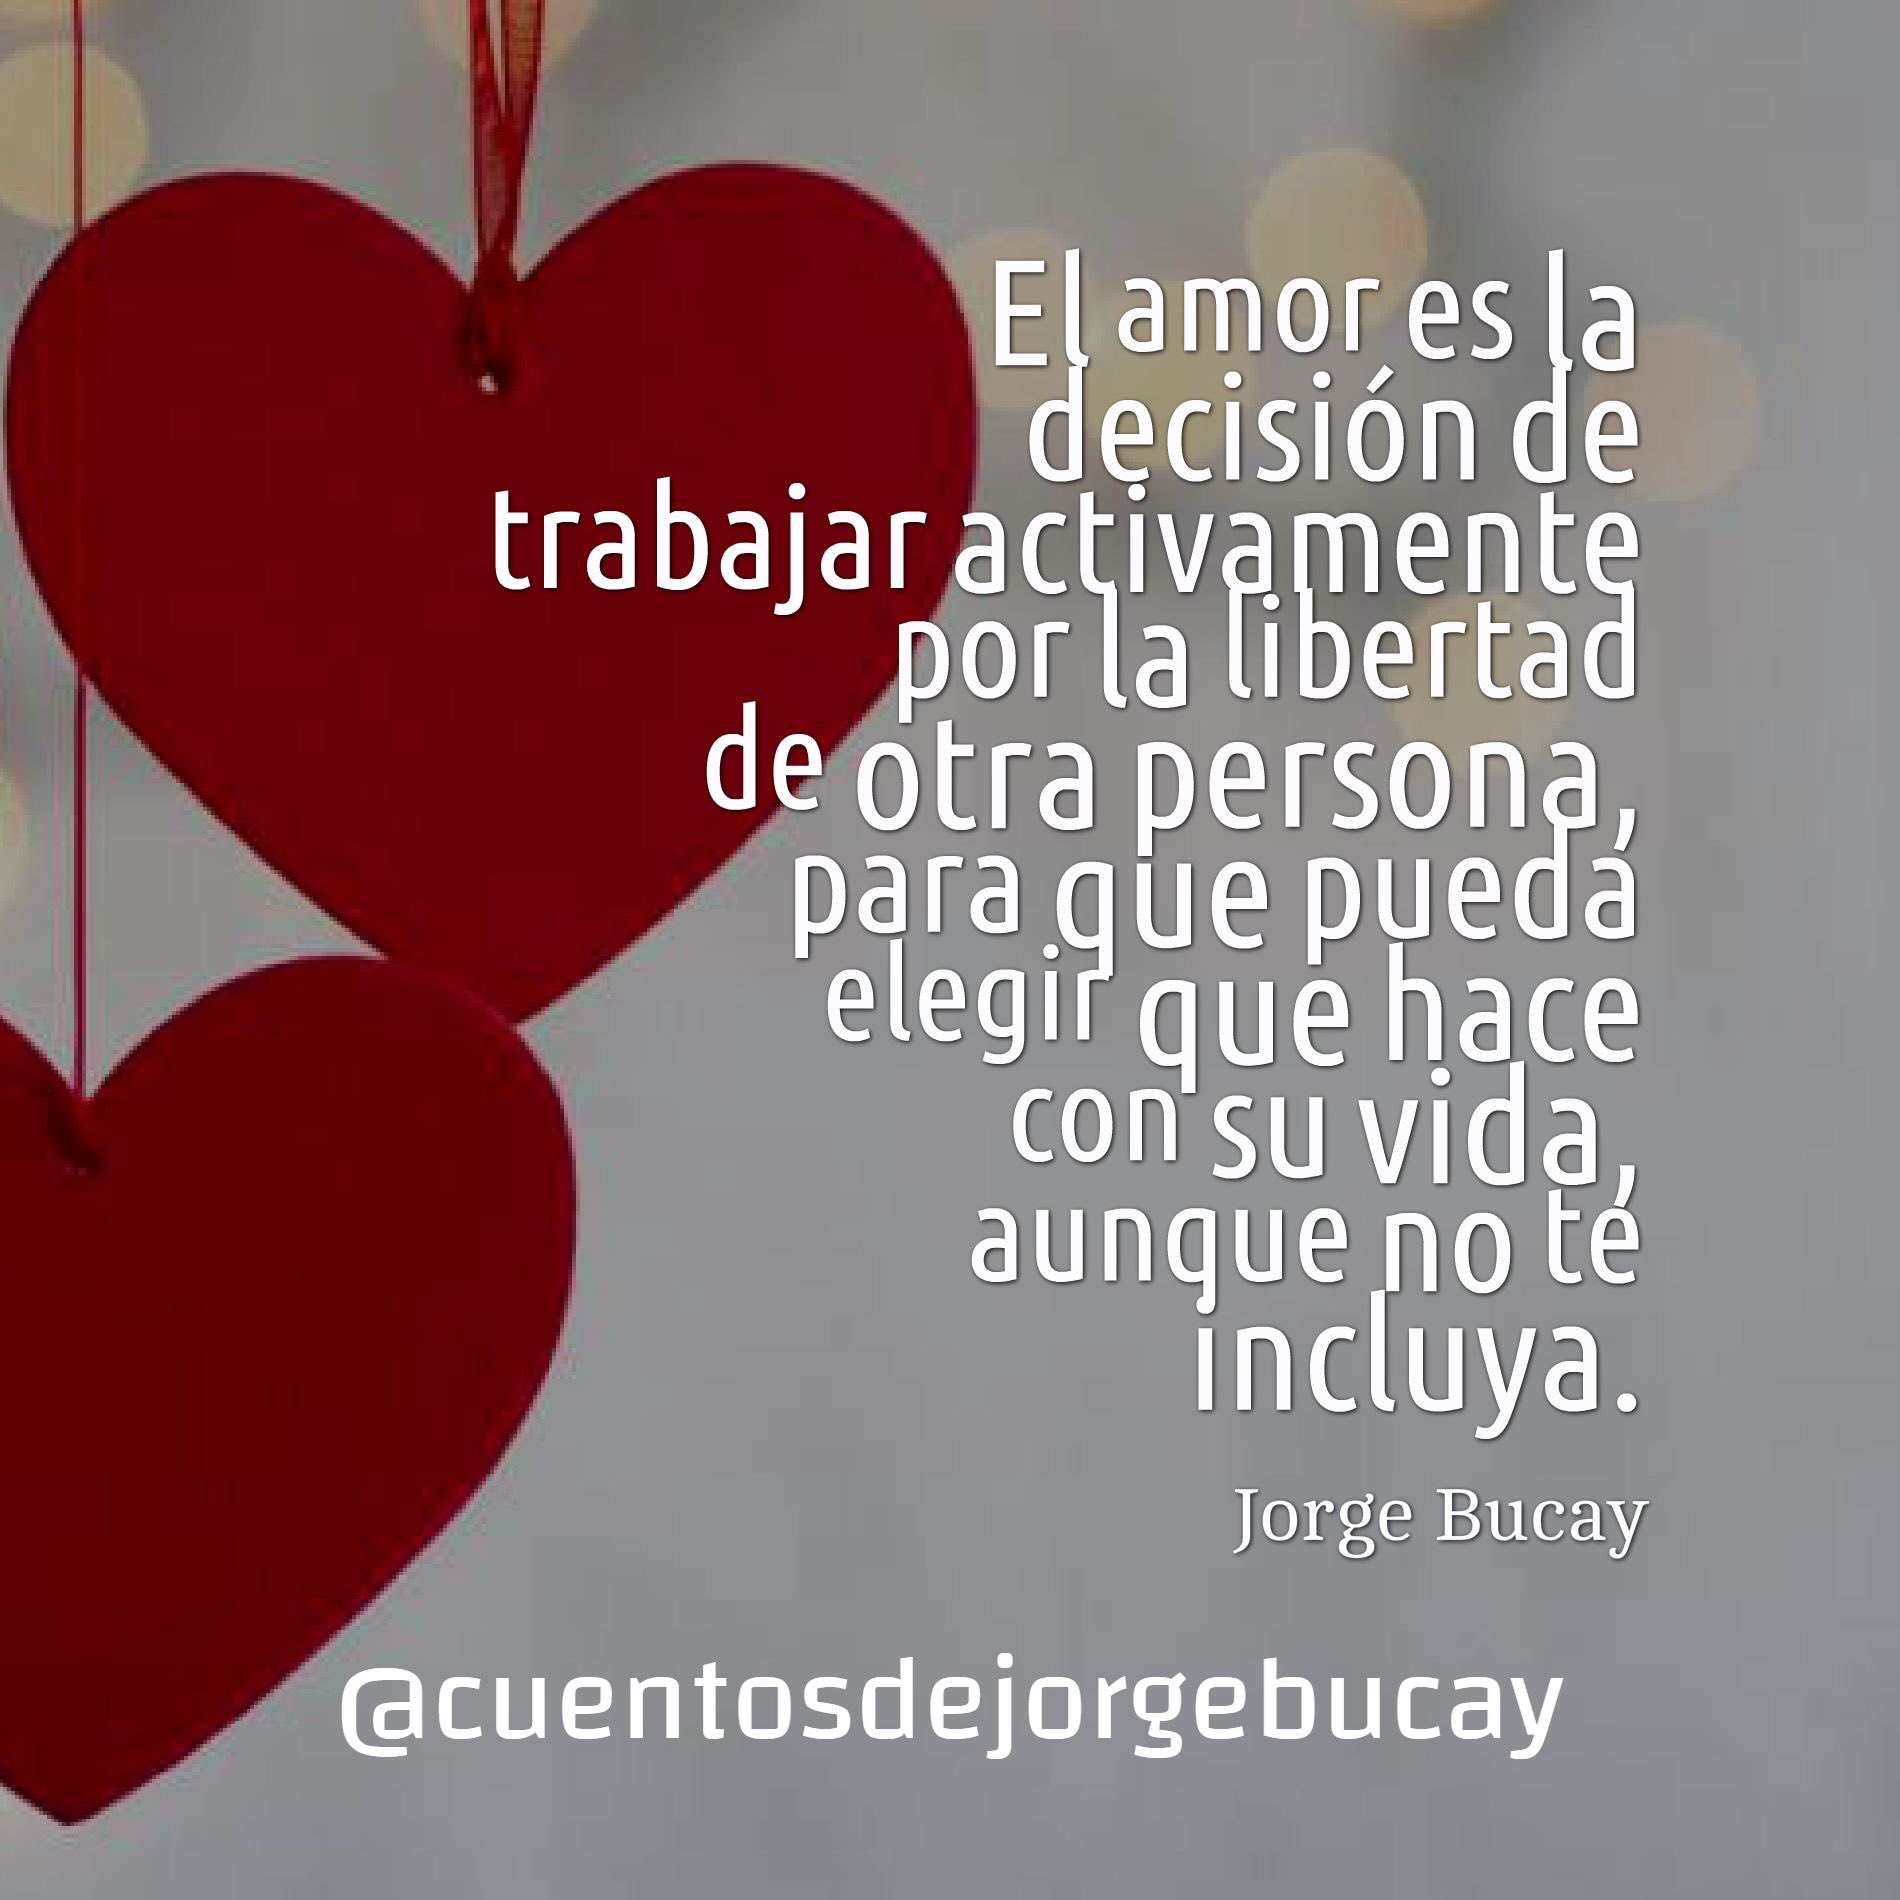 Cuentos Jorge Bucay on Twitter: 